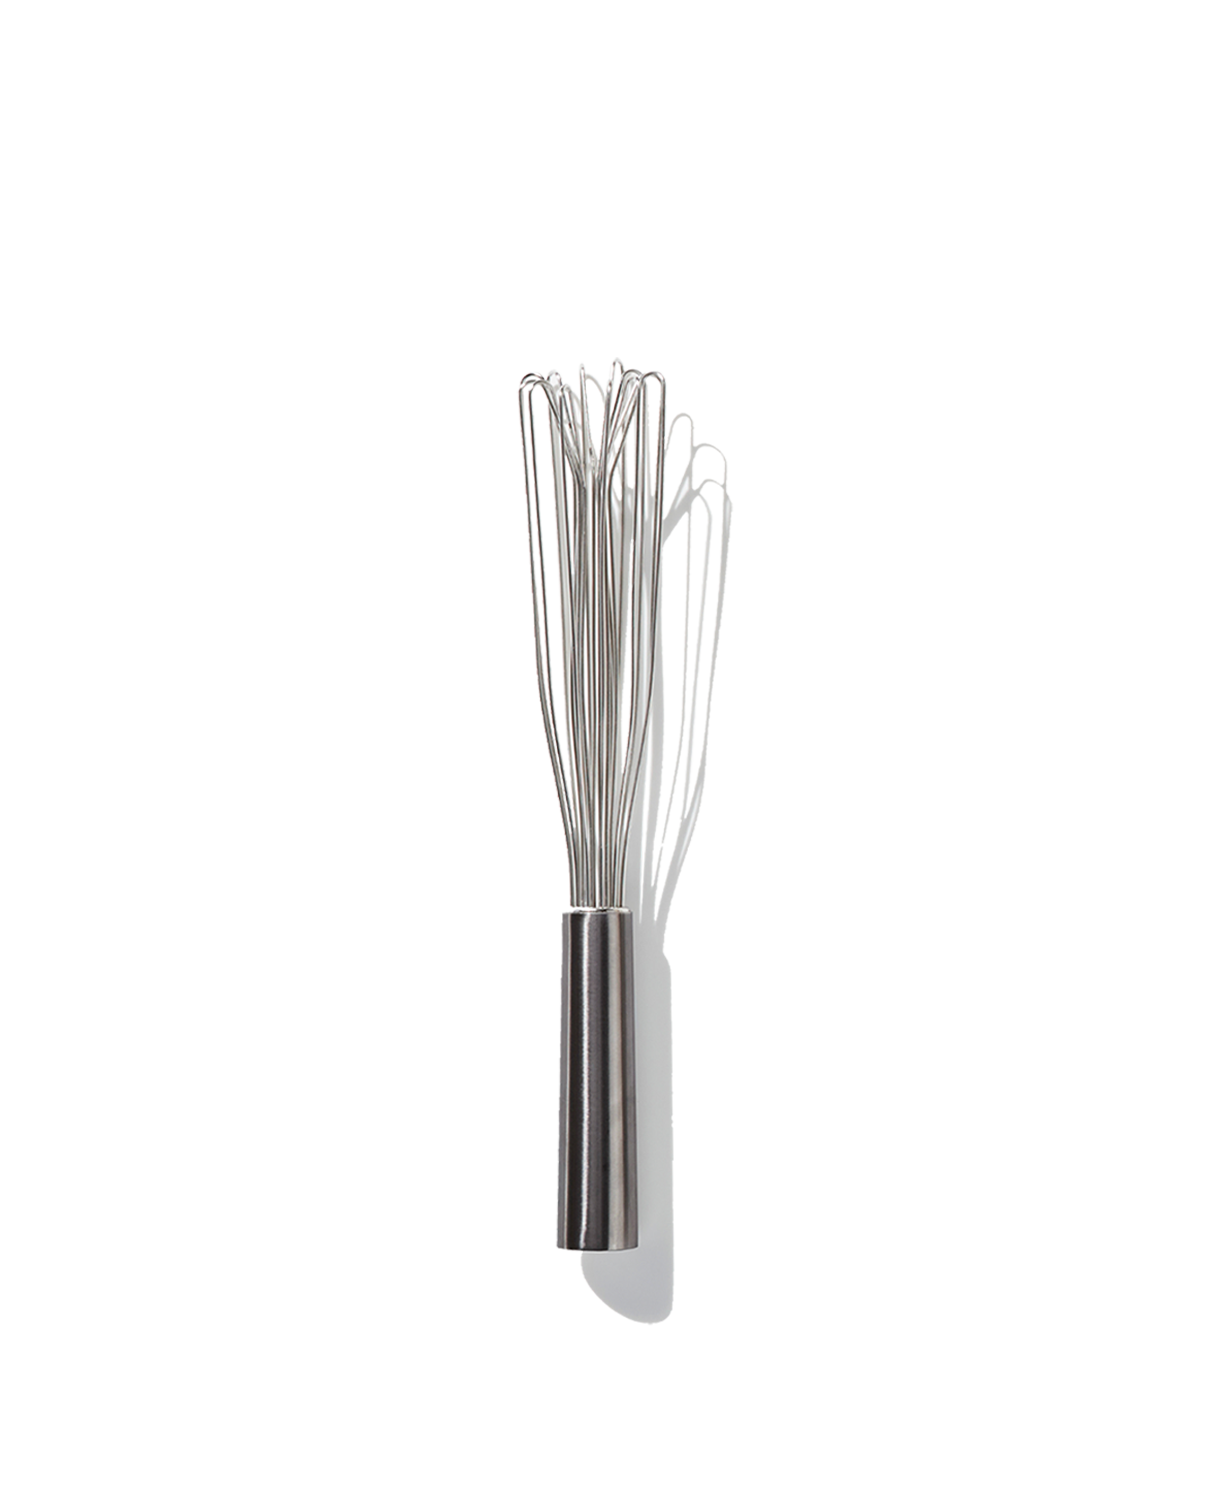 Collapsible Whisk, 2-in-1 Balloon / Flat Whisk Manual Egg Whisk